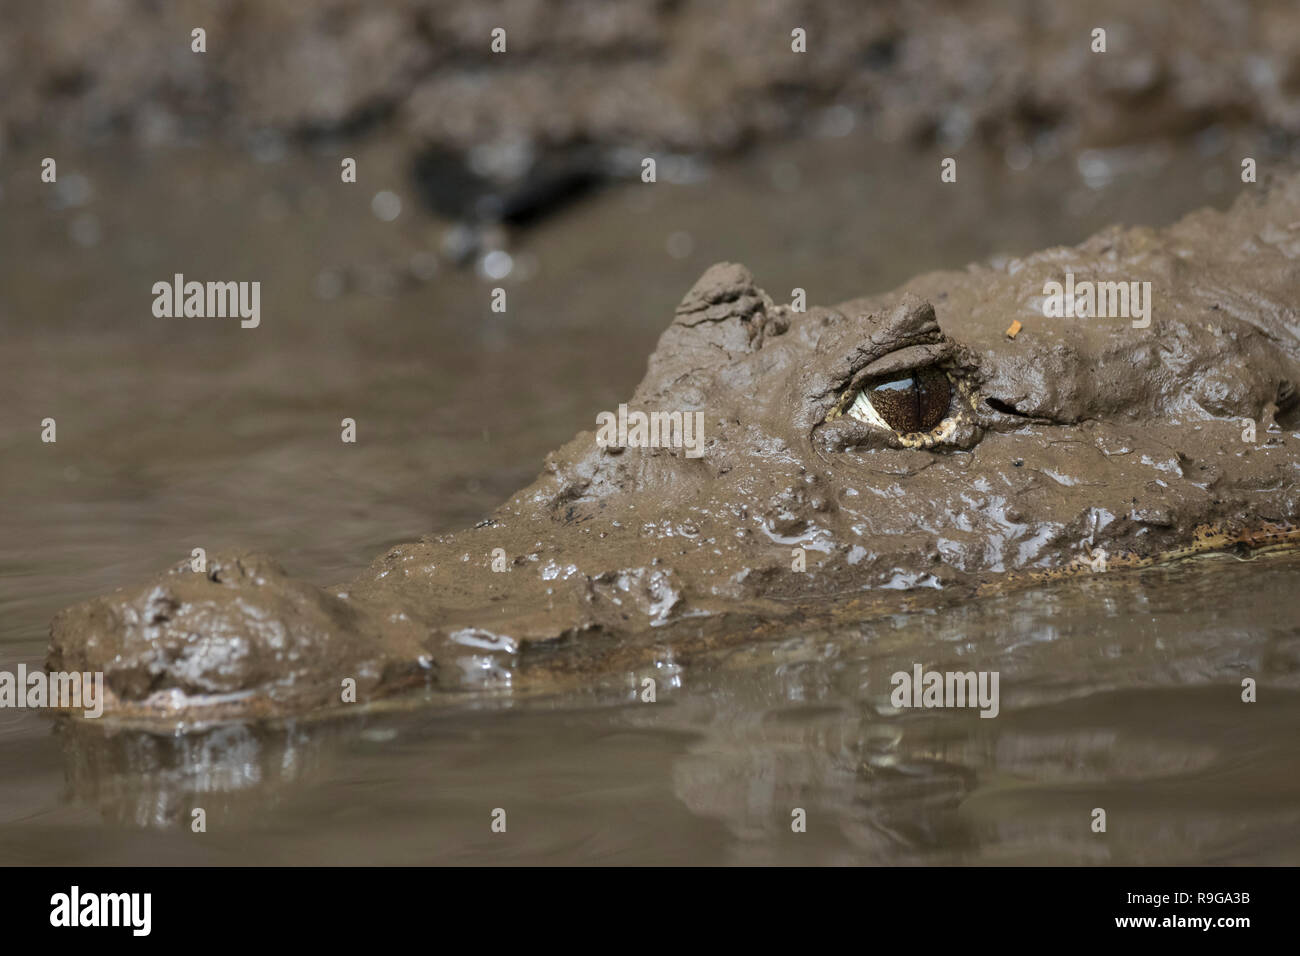 Spectacled Caiman (Caiman crocodilus) portrait. Puerto Viejo river. Heredia province. Costa Rica. Stock Photo